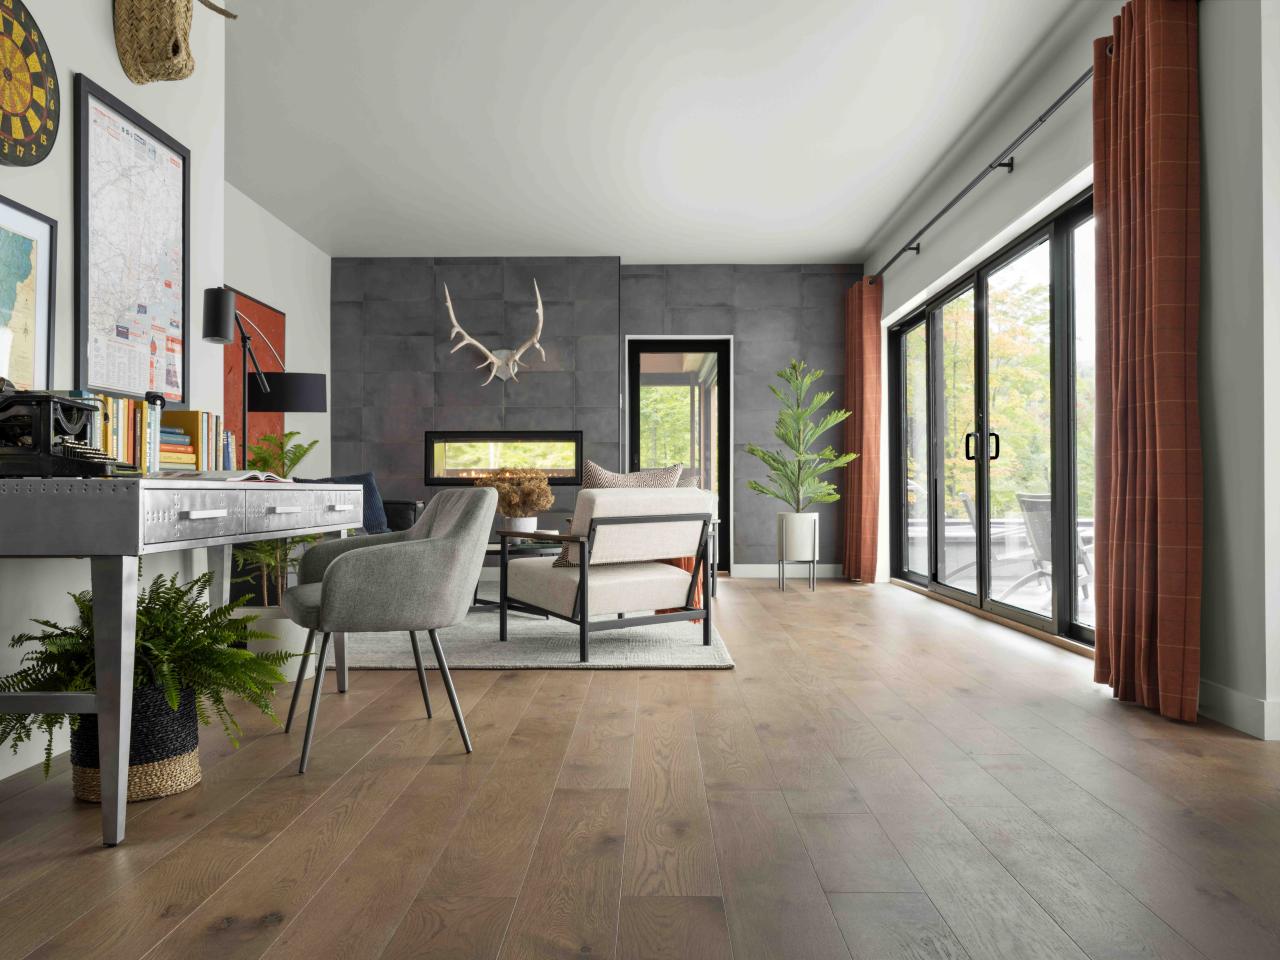 The Best Mops for Wood Floors of 2024 - Tested by Bob Vila